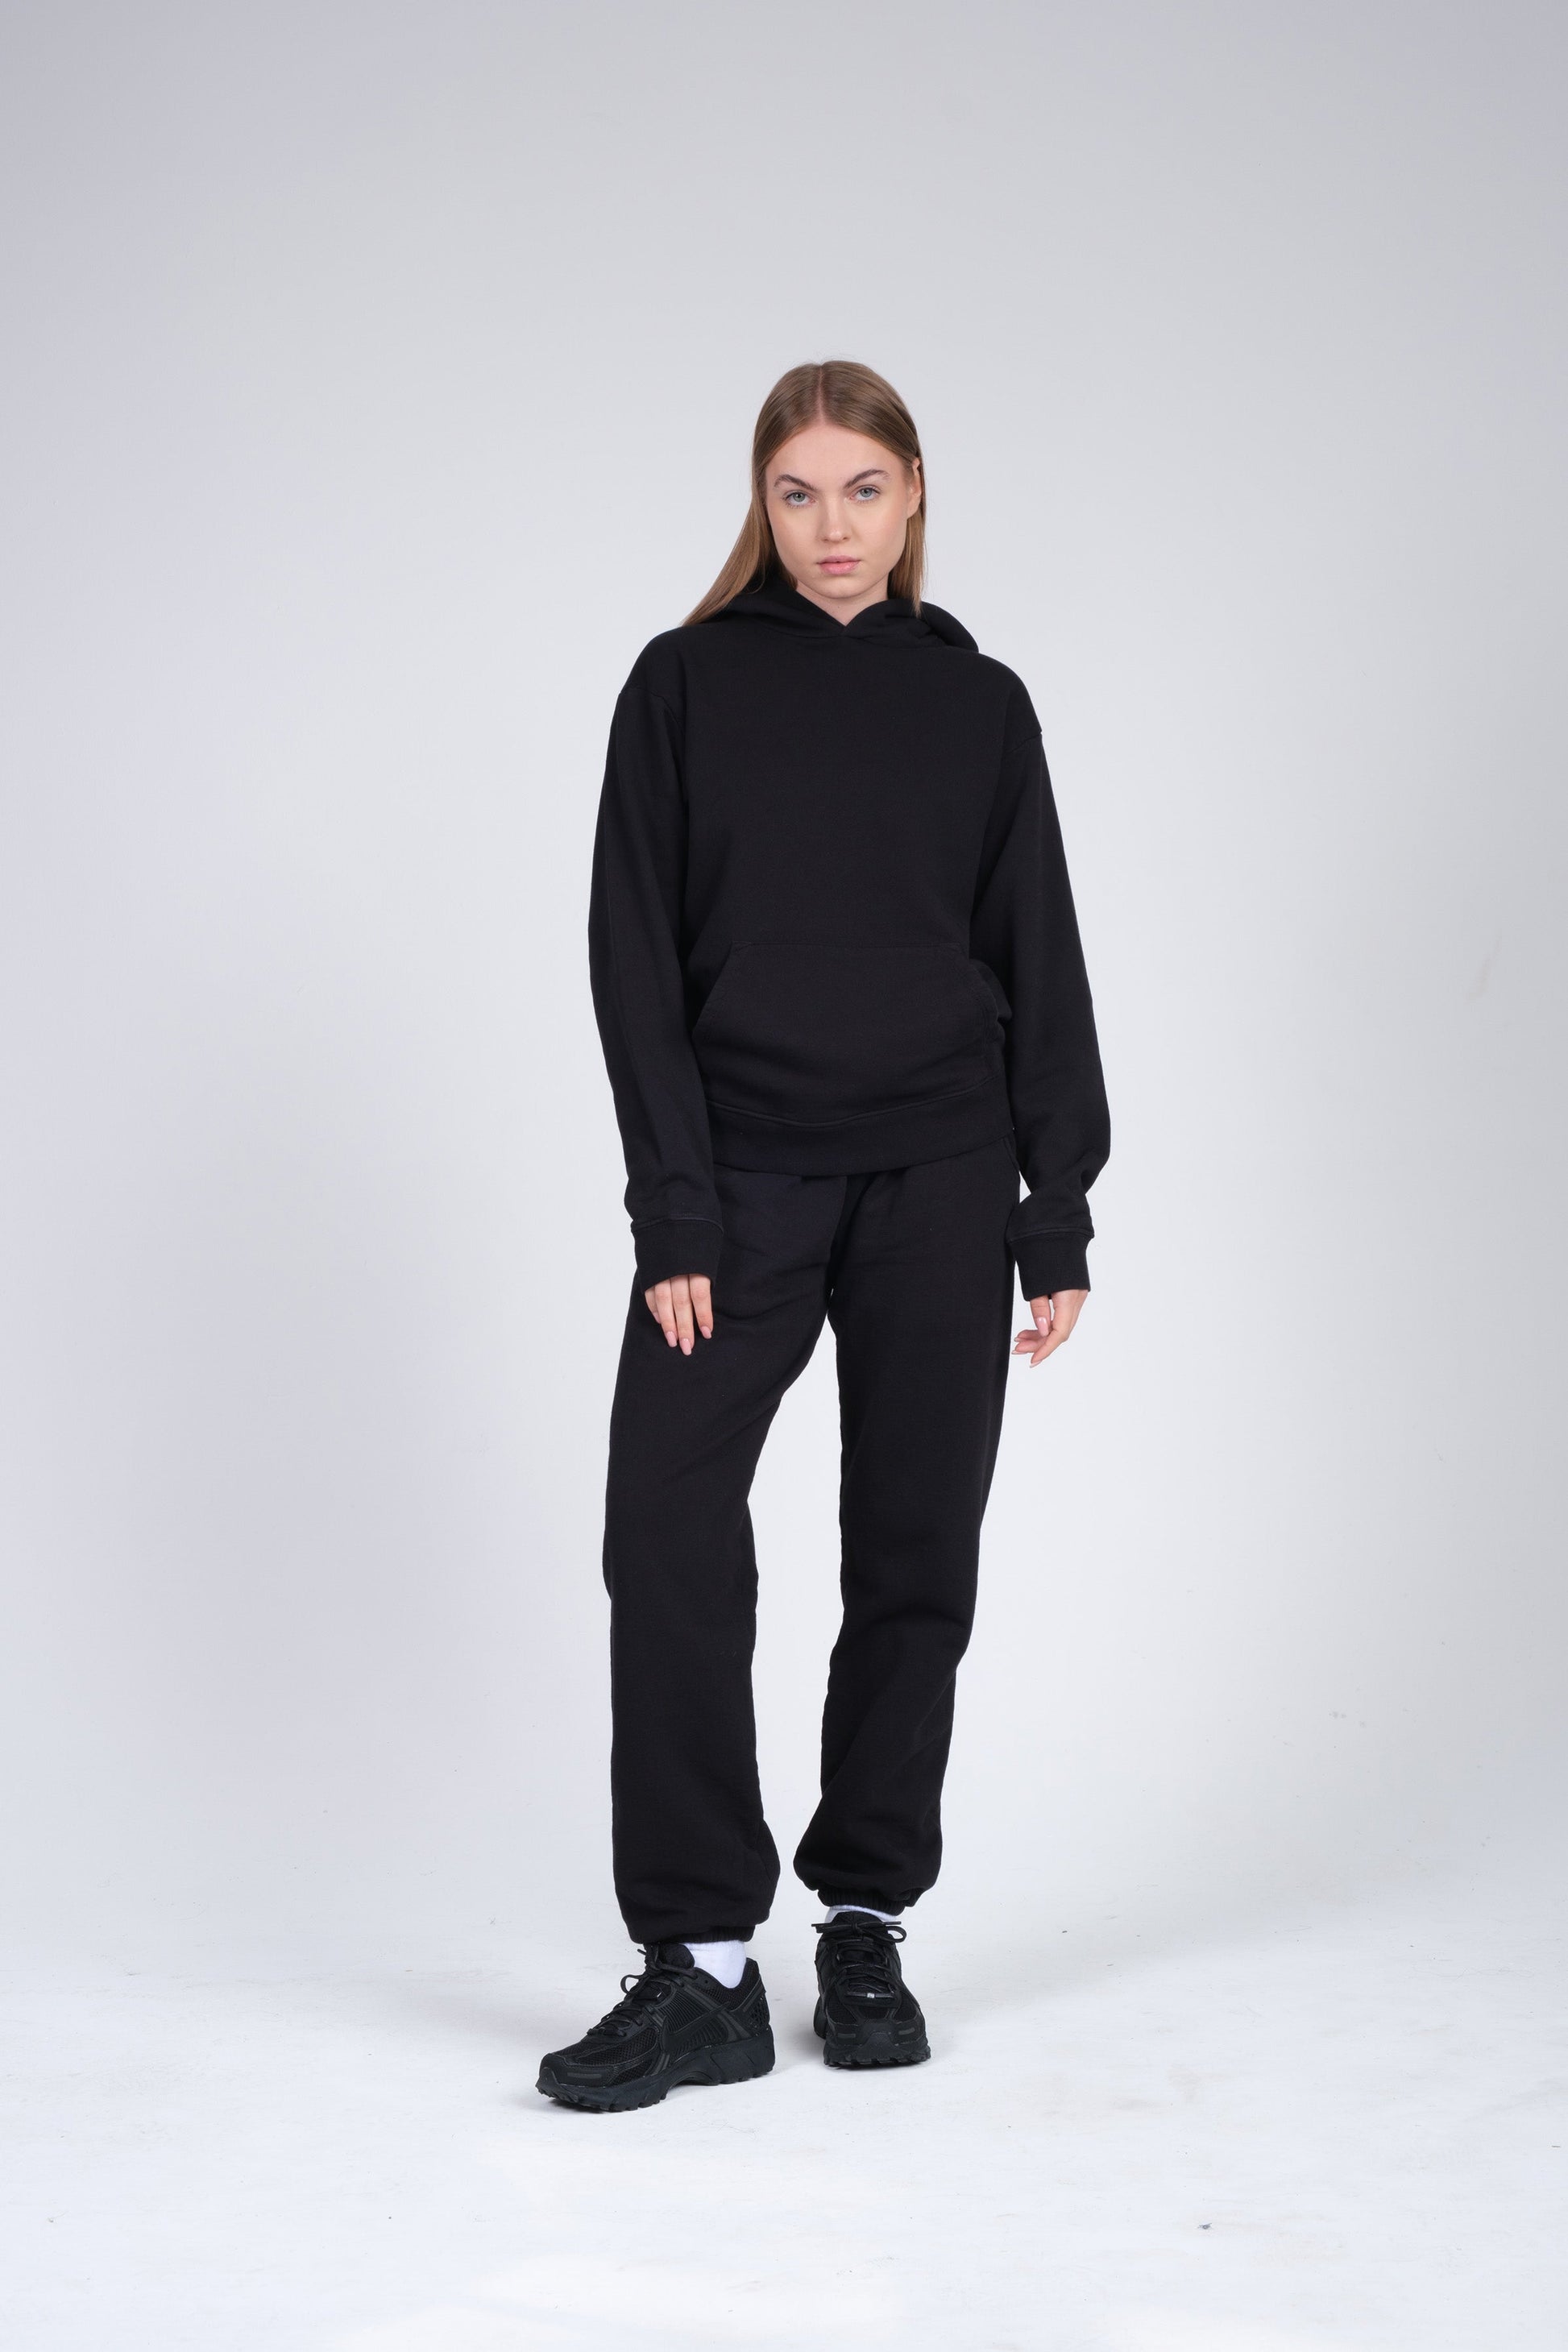 Black Sweatsuit - Oversized Hoodie and Sweatpant for Women